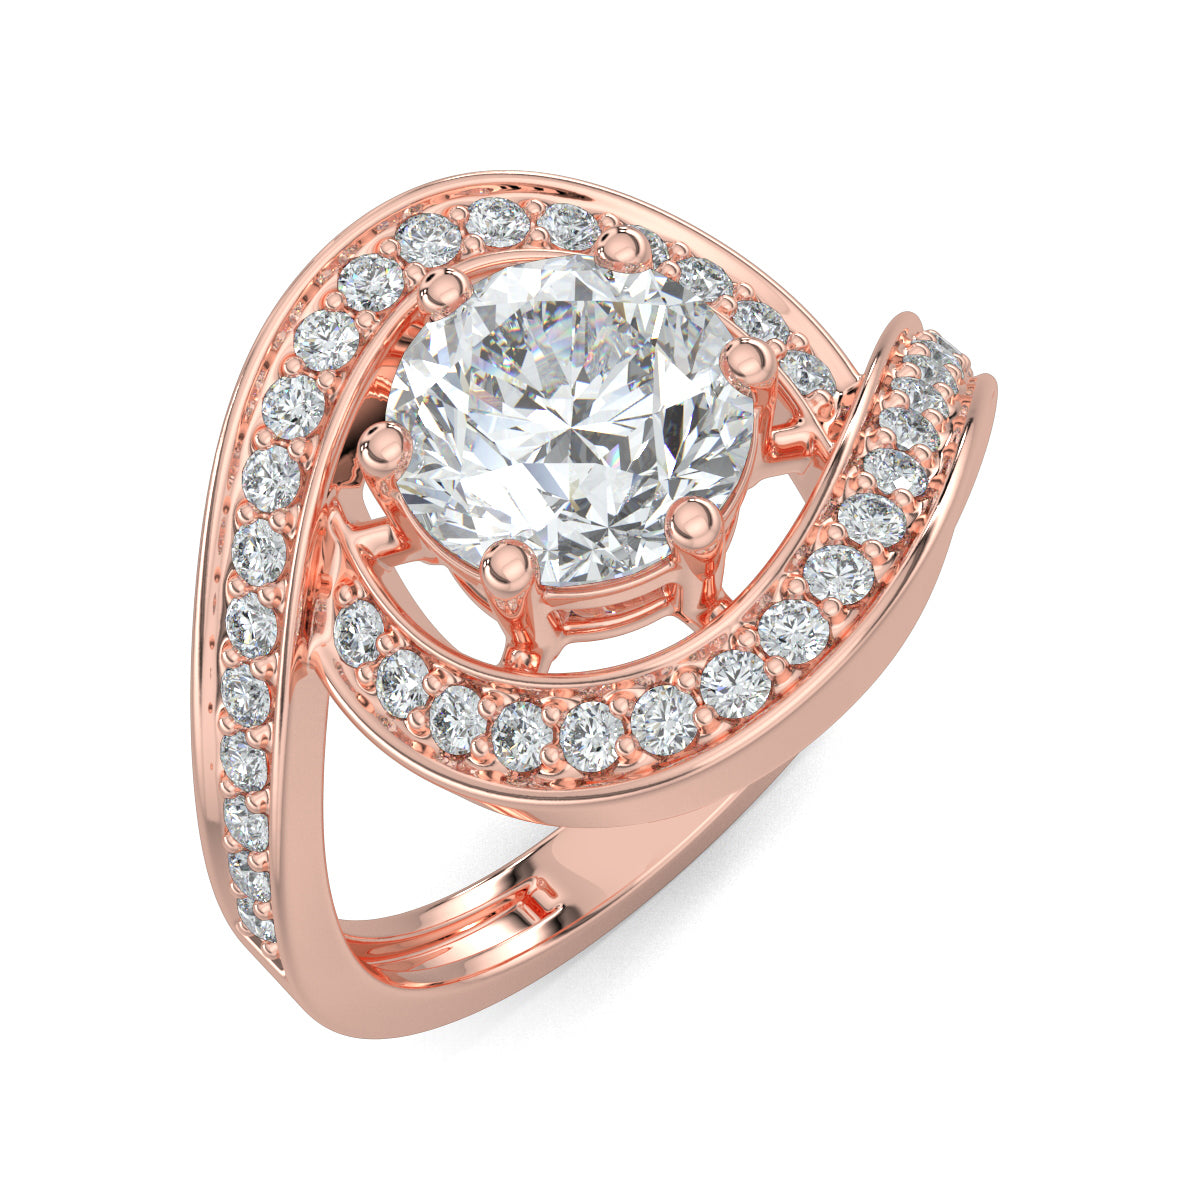 Rose Gold, Diamond Ring, Luminous Loop, Solitaire Ring, Natural Diamonds, Lab-Grown Diamonds, Loop Band, Pave Setting, Ethical Jewelry, Sustainable Diamonds, Engagement Ring, Diamond Jewelry